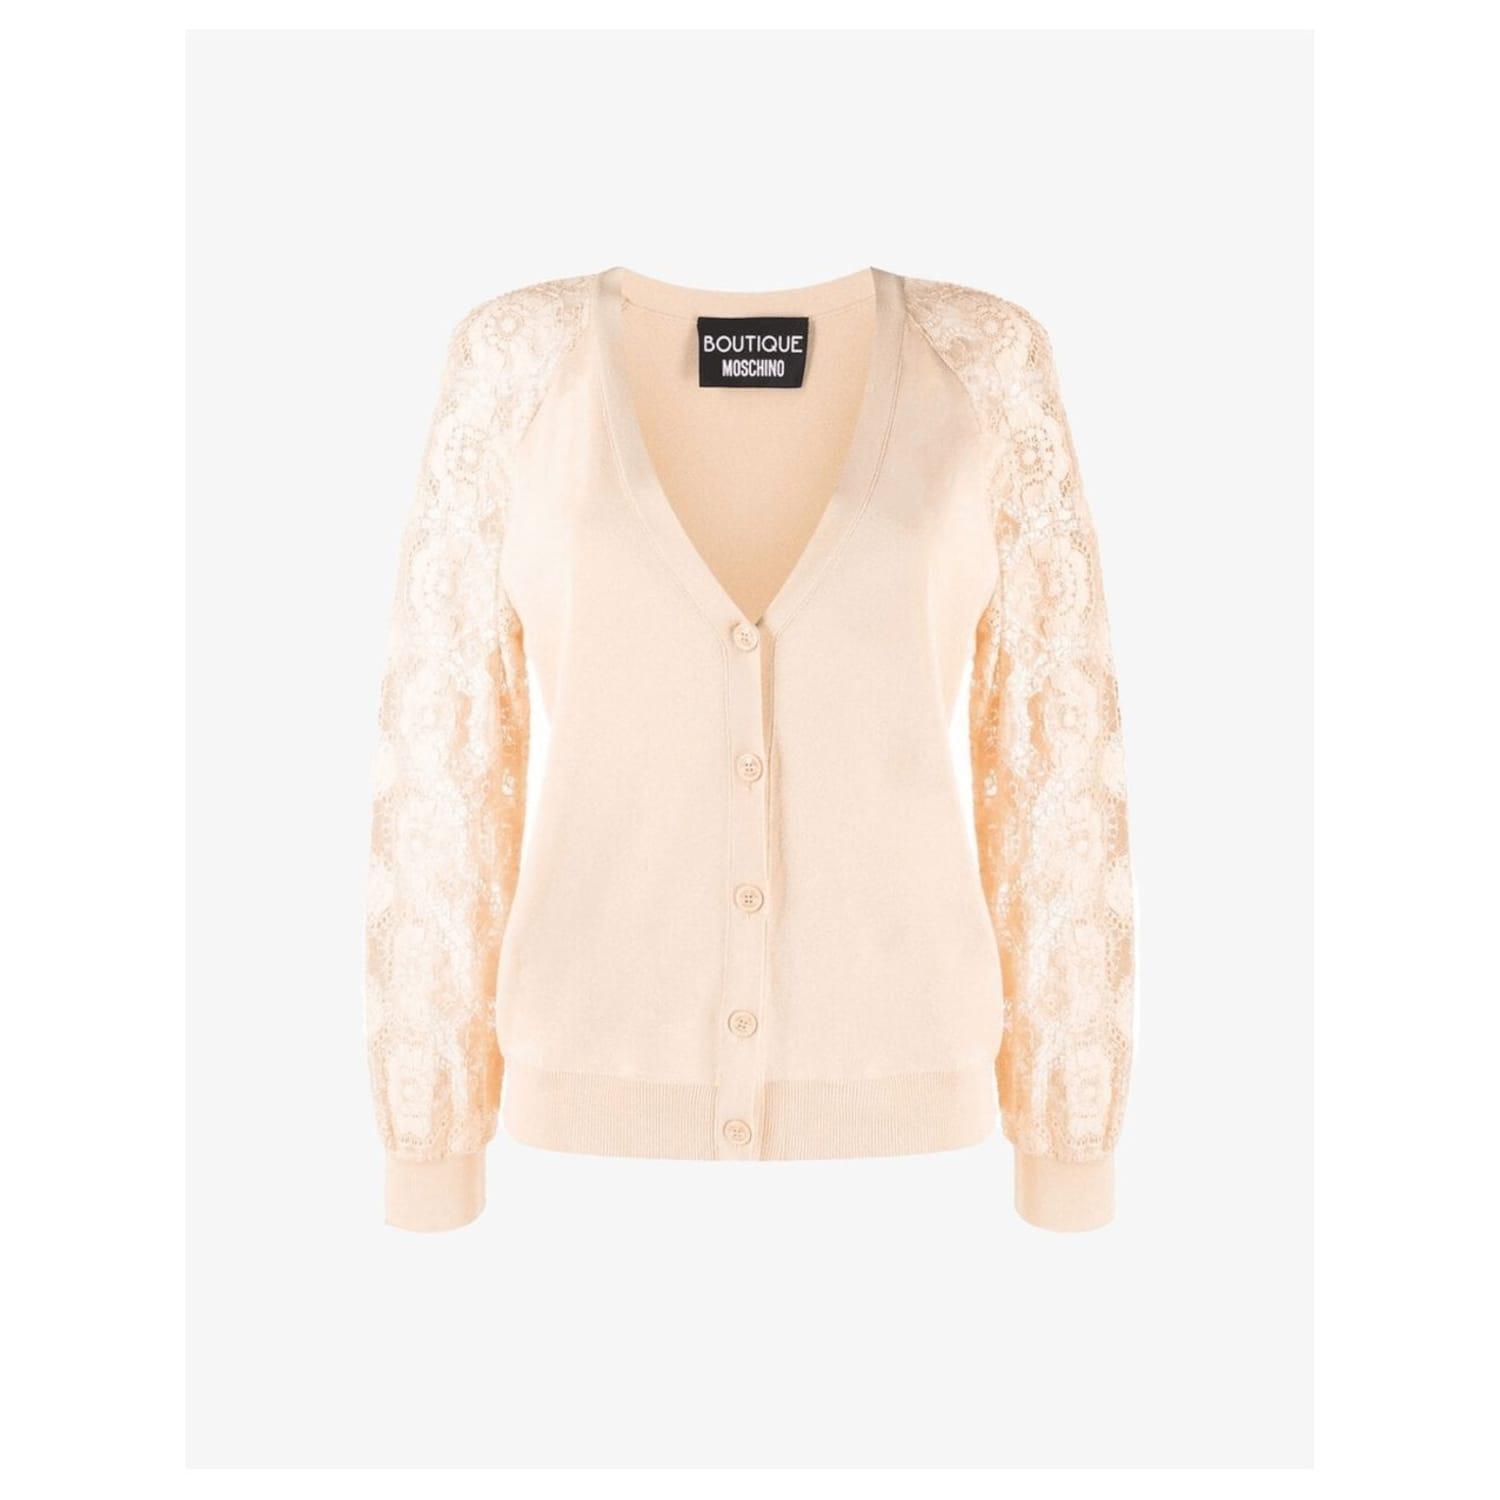 Boutique Moschino Peach Lace Cardigan in Natural | Lyst